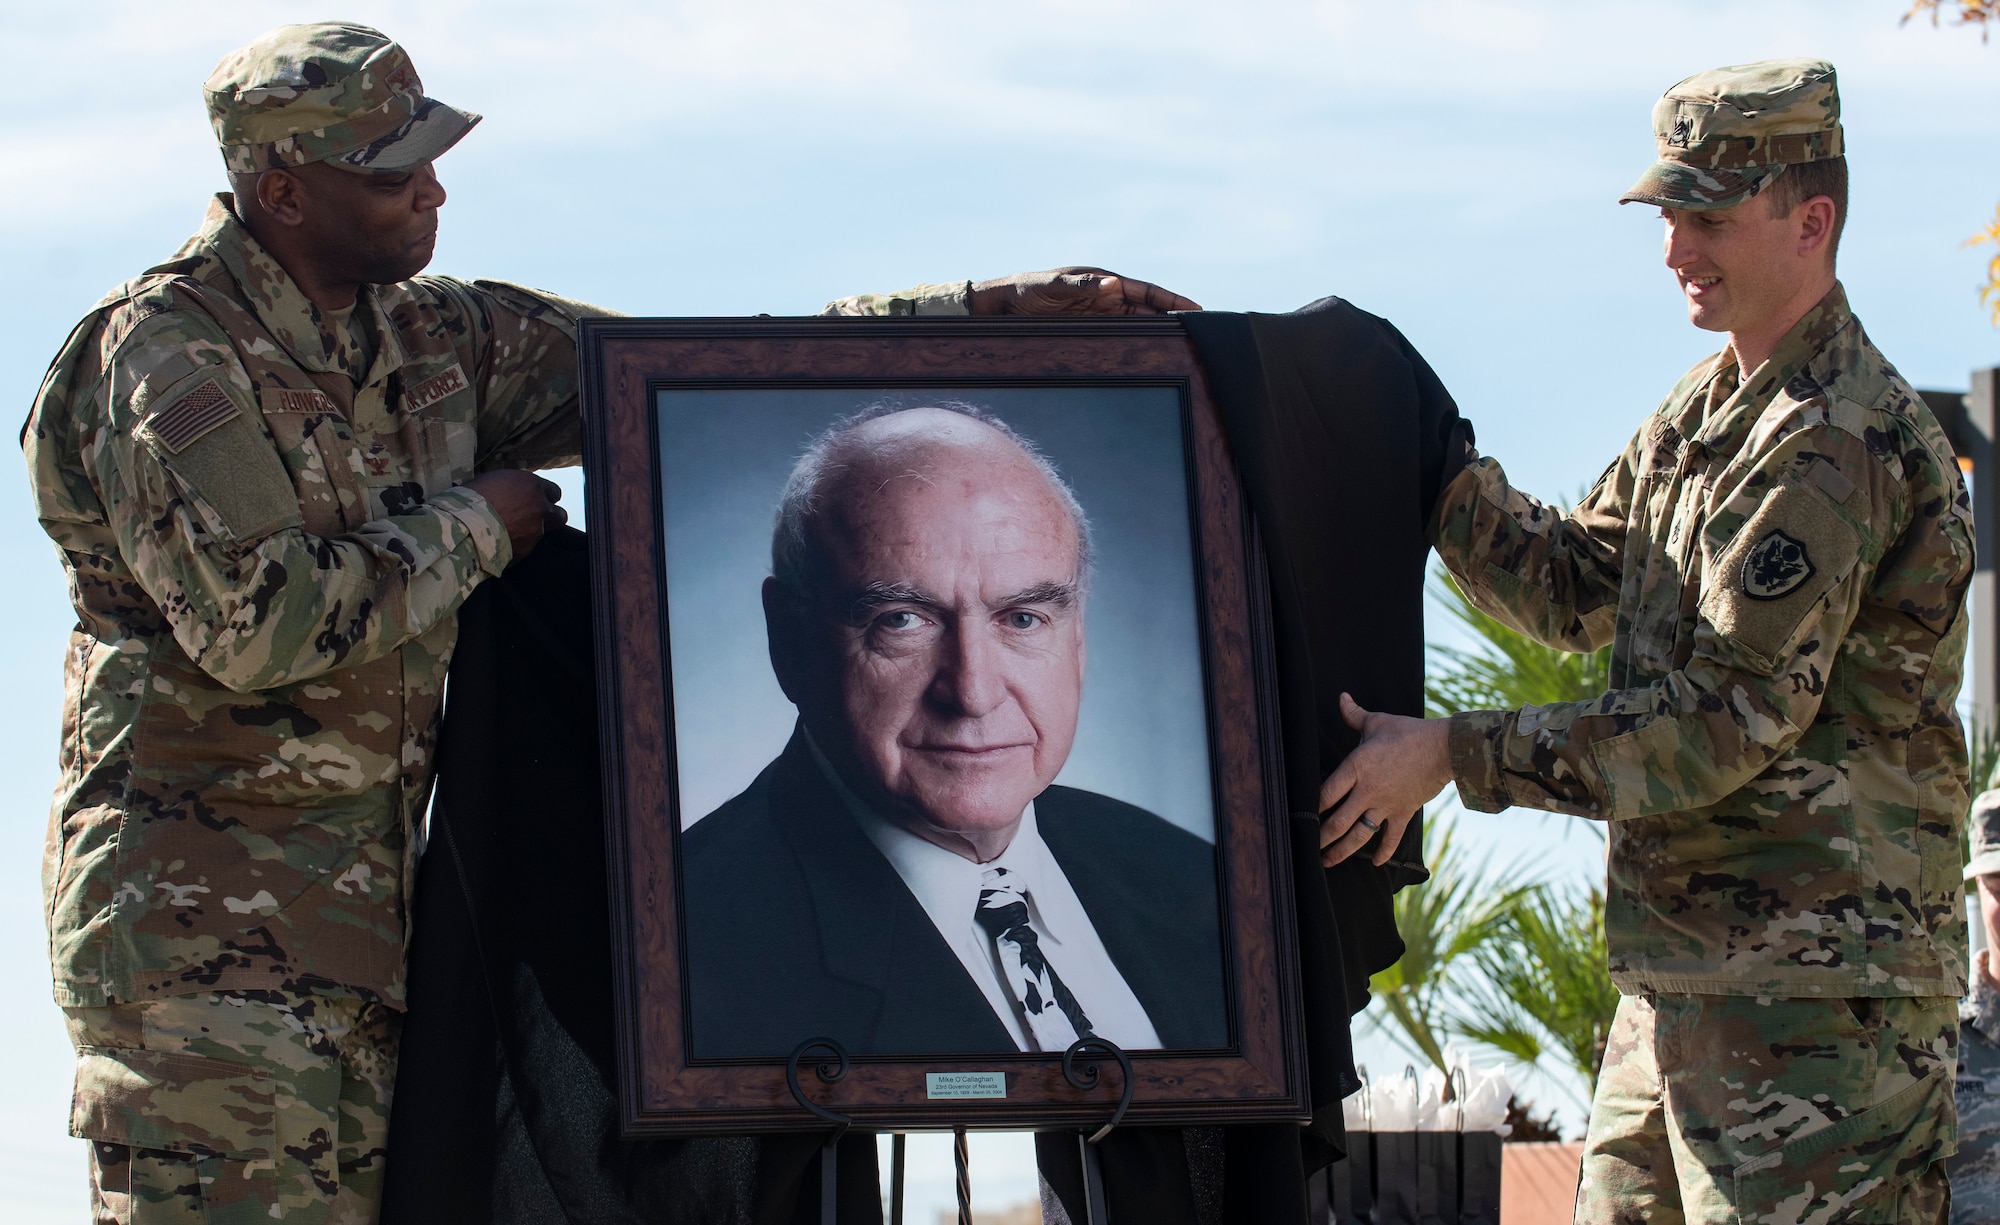 Col. Alfred Flowers, 99th Medical Group commander, and U.S. Army Staff Sgt. Michael O’Callaghan reveal a portrait of O’Callaghan during a ceremony celebrating the Mike O’Callaghan Military Medical Center’s 25th Anniversary on Nellis Air Force Base, Nevada, Nov. 12, 2019. The portrait will hang in the MOMMC to honor the centers namesake. (U.S. Air Force photo by Senior Airman Kevin Tanenbaum)